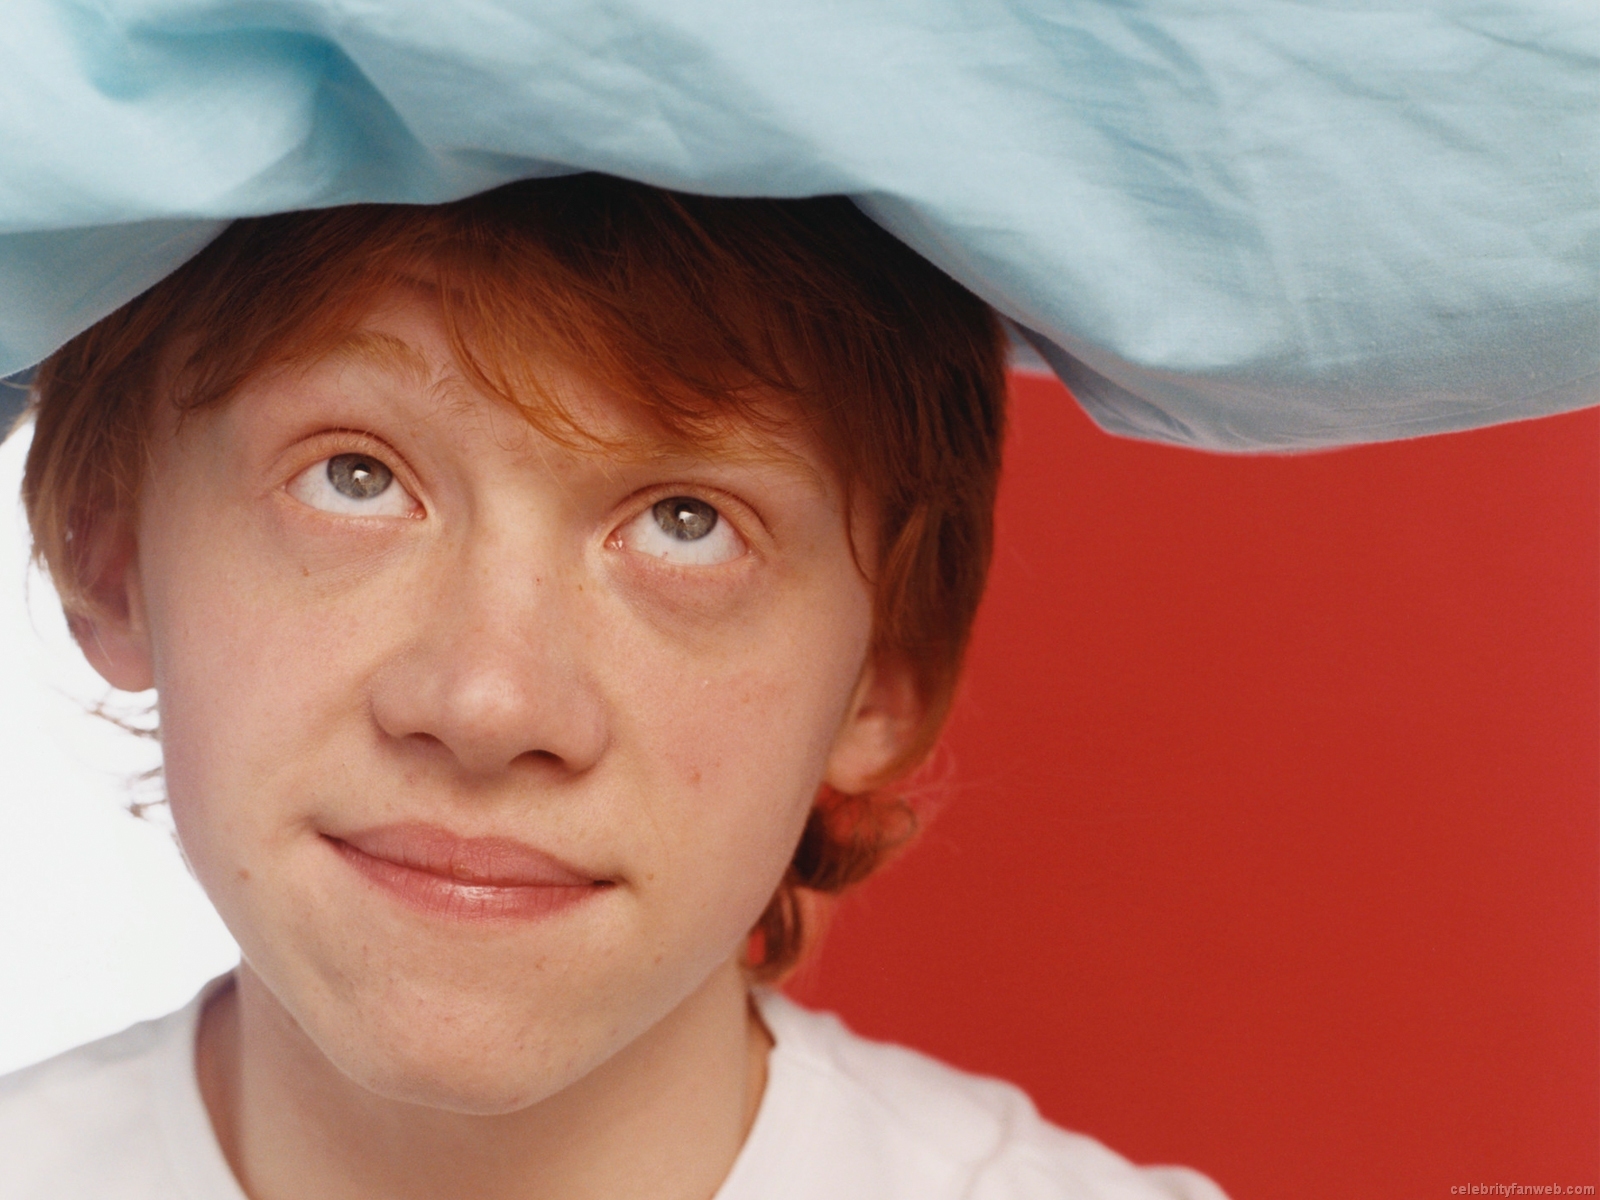 Rupert Grint Images | Icons, Wallpapers and Photos on Fanpop